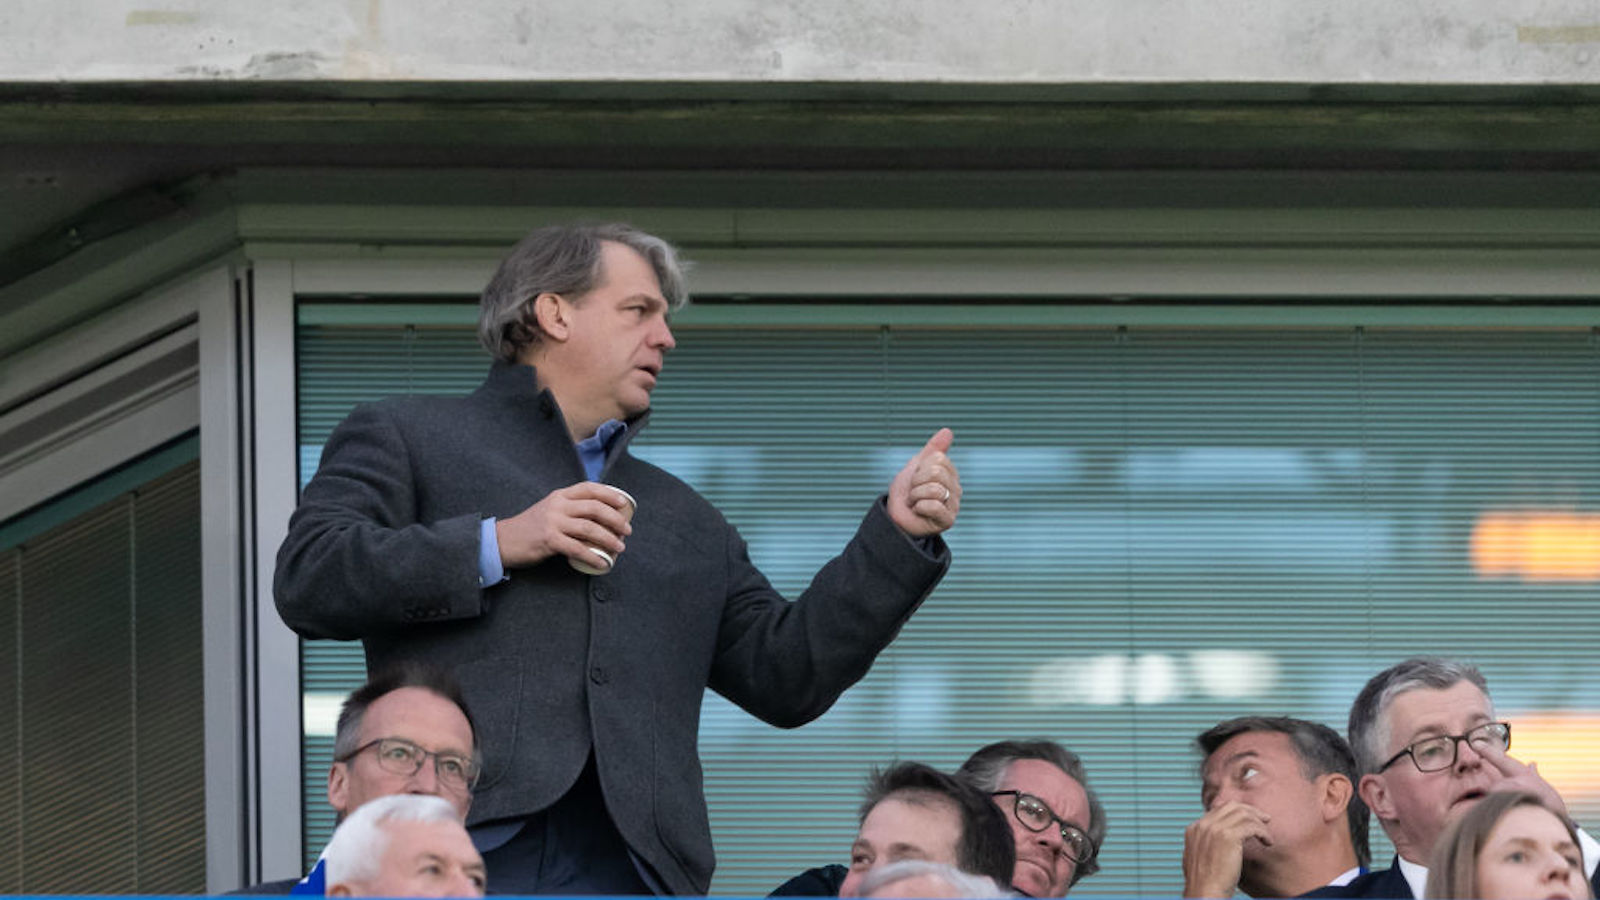 LONDON, ENGLAND - APRIL 18: Chelsea owner Todd Boehly gestures prior to the UEFA Champions League quarterfinal second leg match between Chelsea FC and Real Madrid at Stamford Bridge on April 18, 2023 in London, United Kingdom.